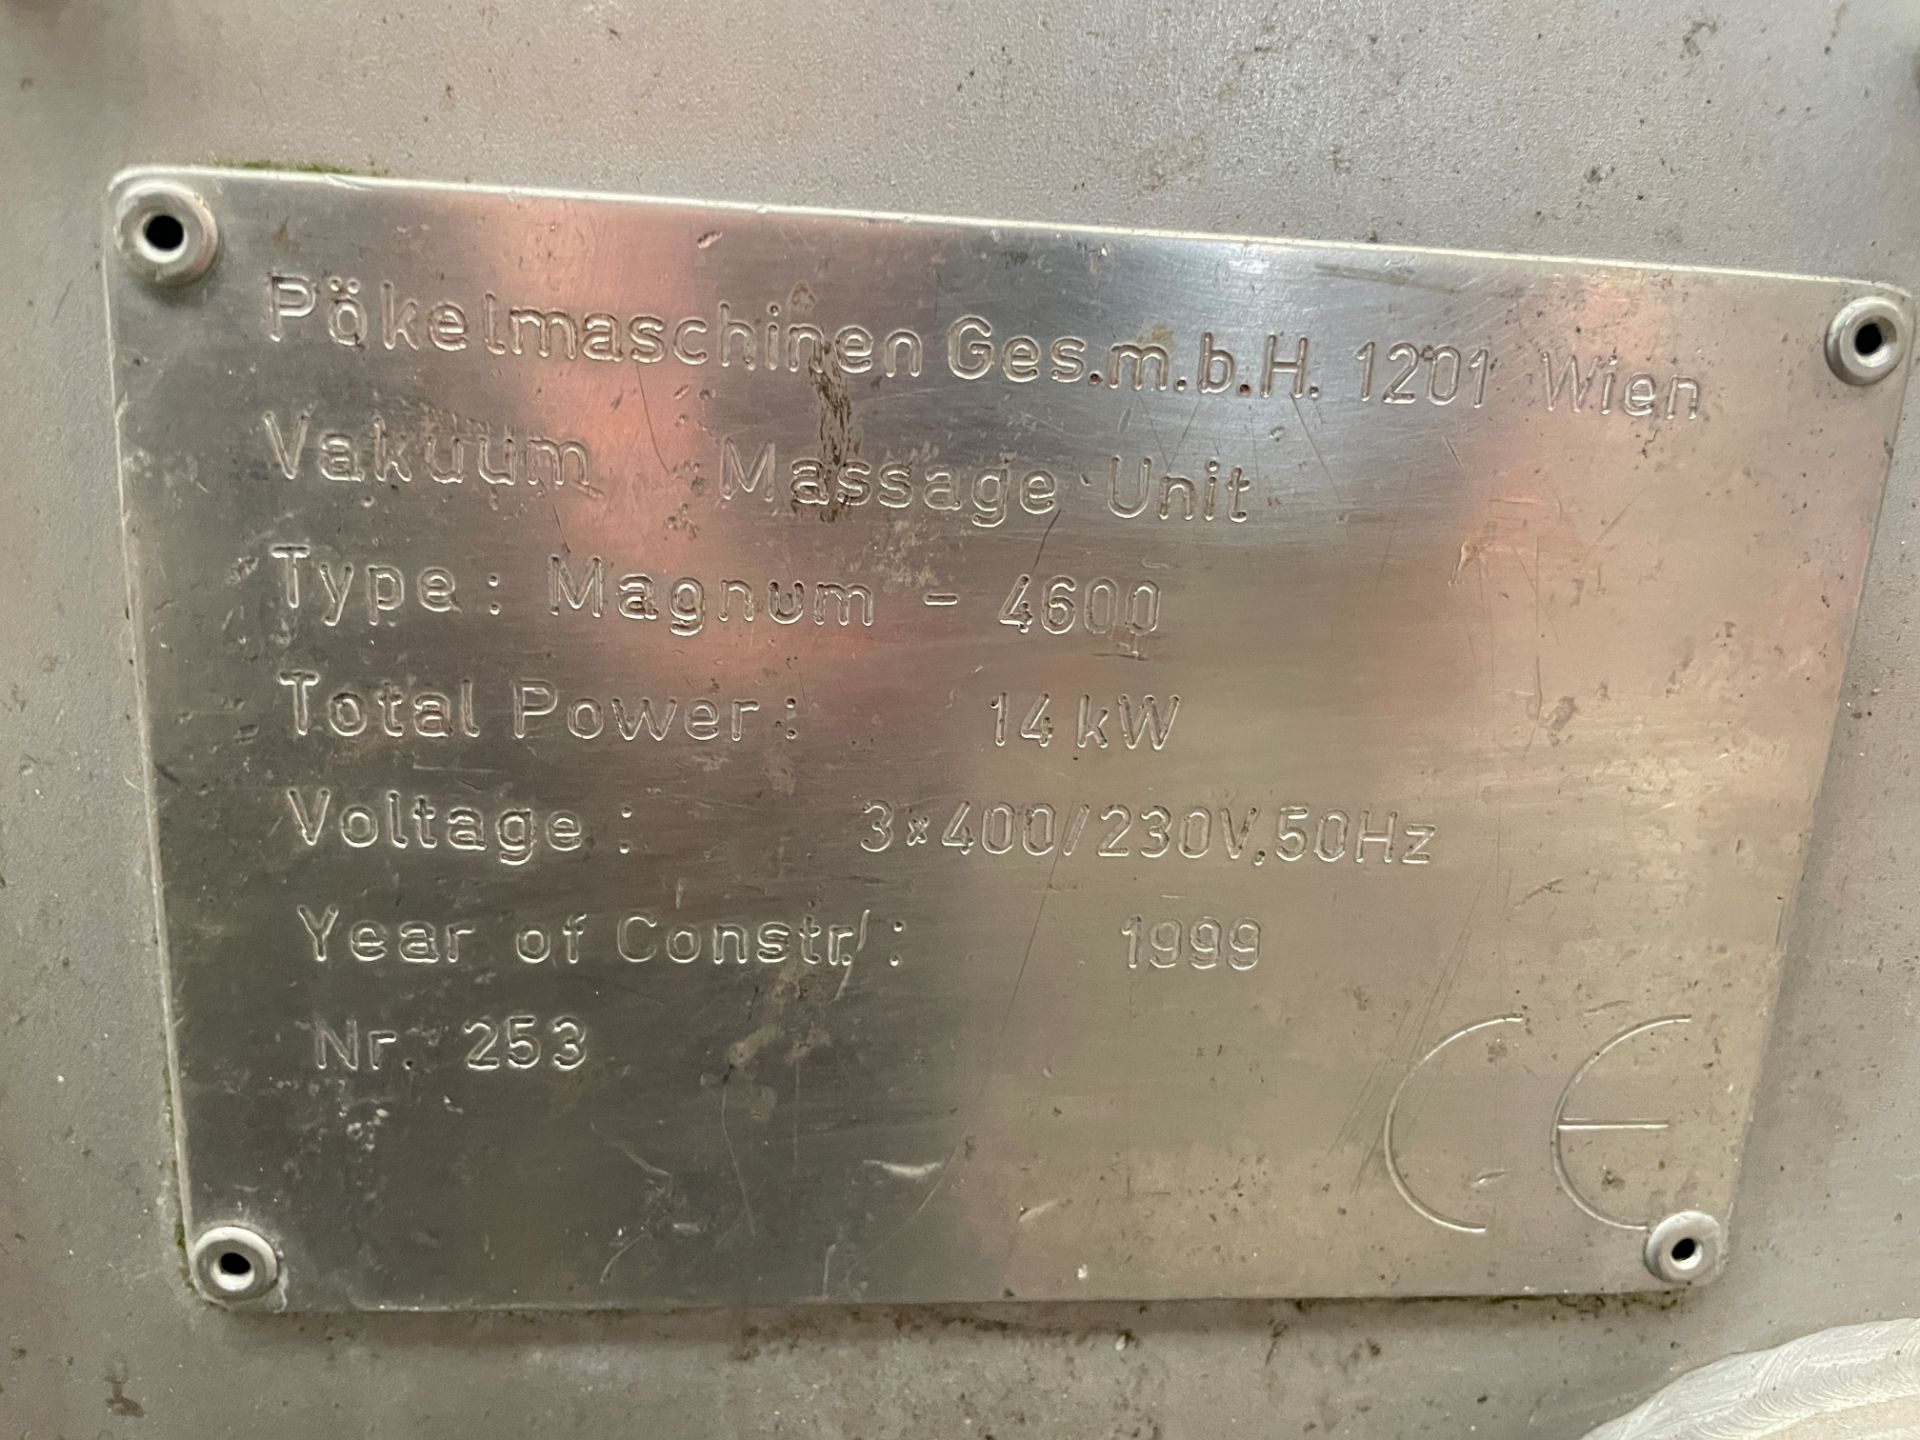 Pokelmaschinen Magnum - 4600 Stainless Steel Vacuum Tumbler, serial no. 253 year of manufacture - Image 5 of 6